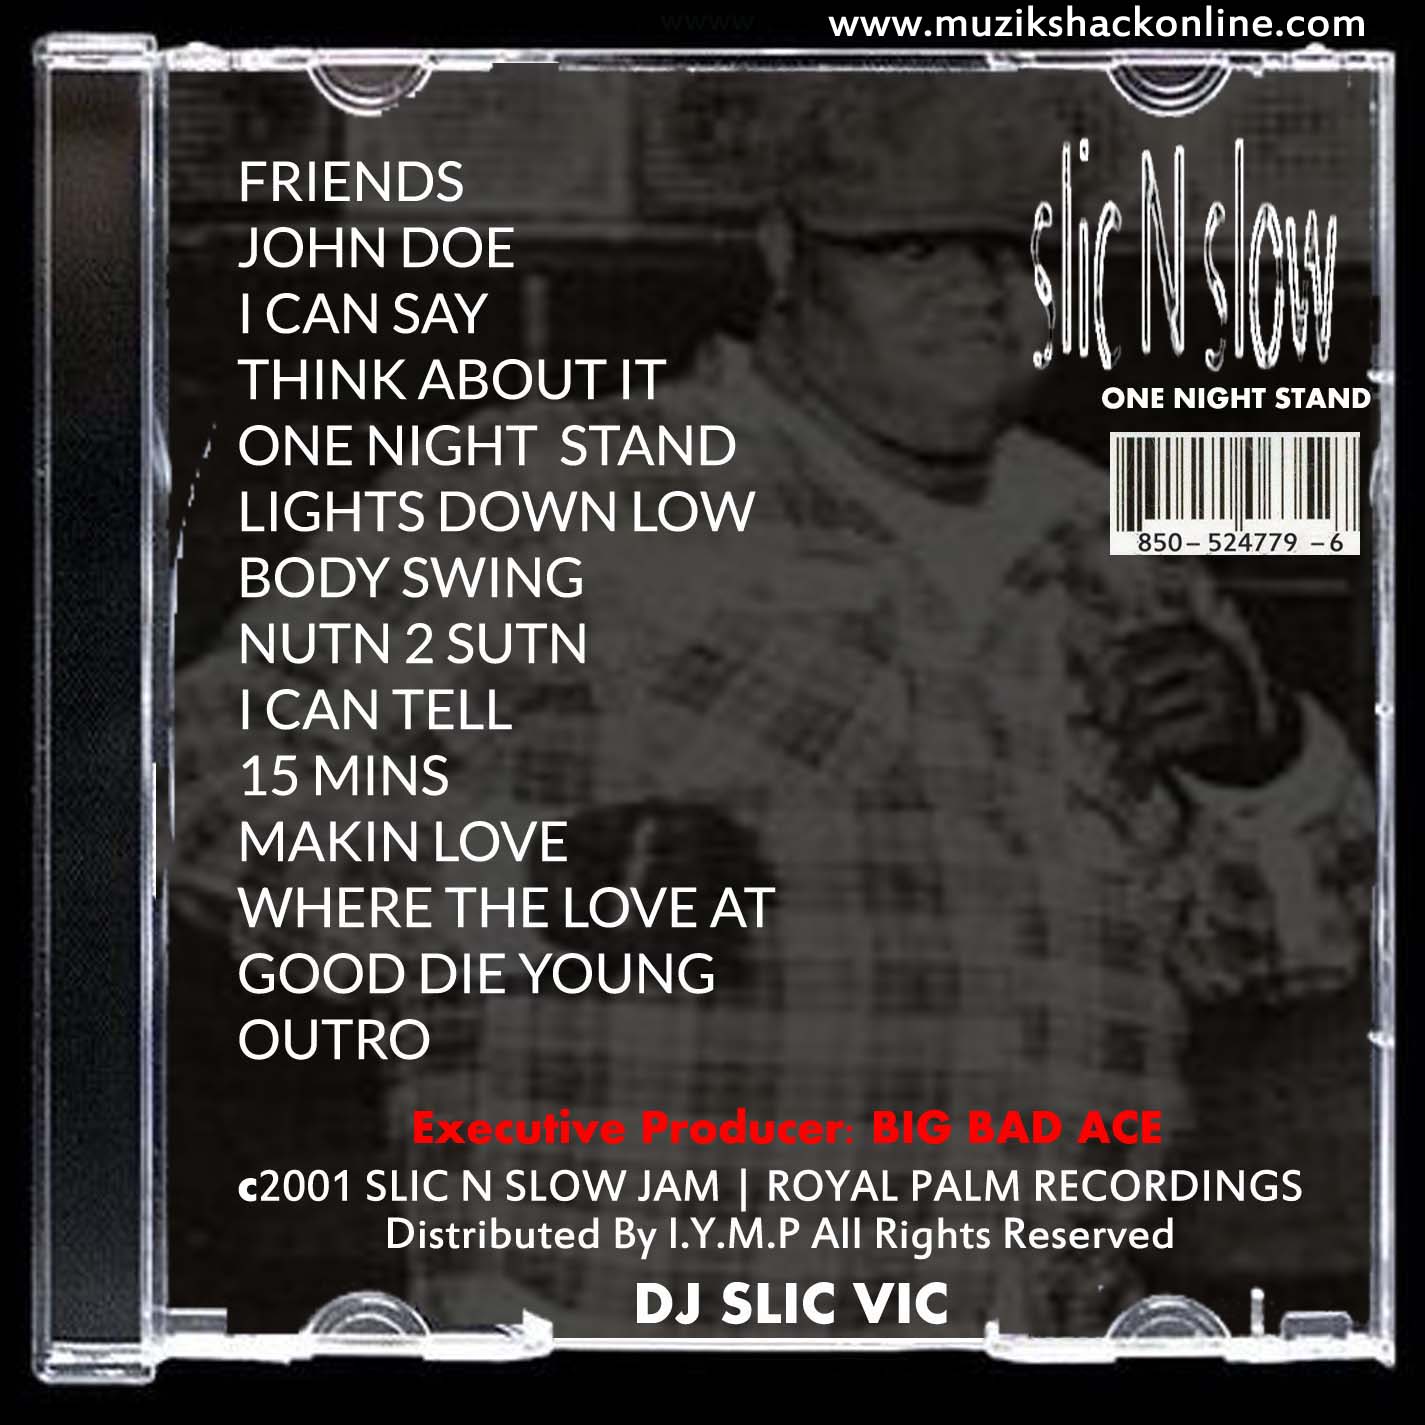 SLIC N SLOW - ONE NIGHT STAND EXCLUSIVE (RARE COPY) c2001